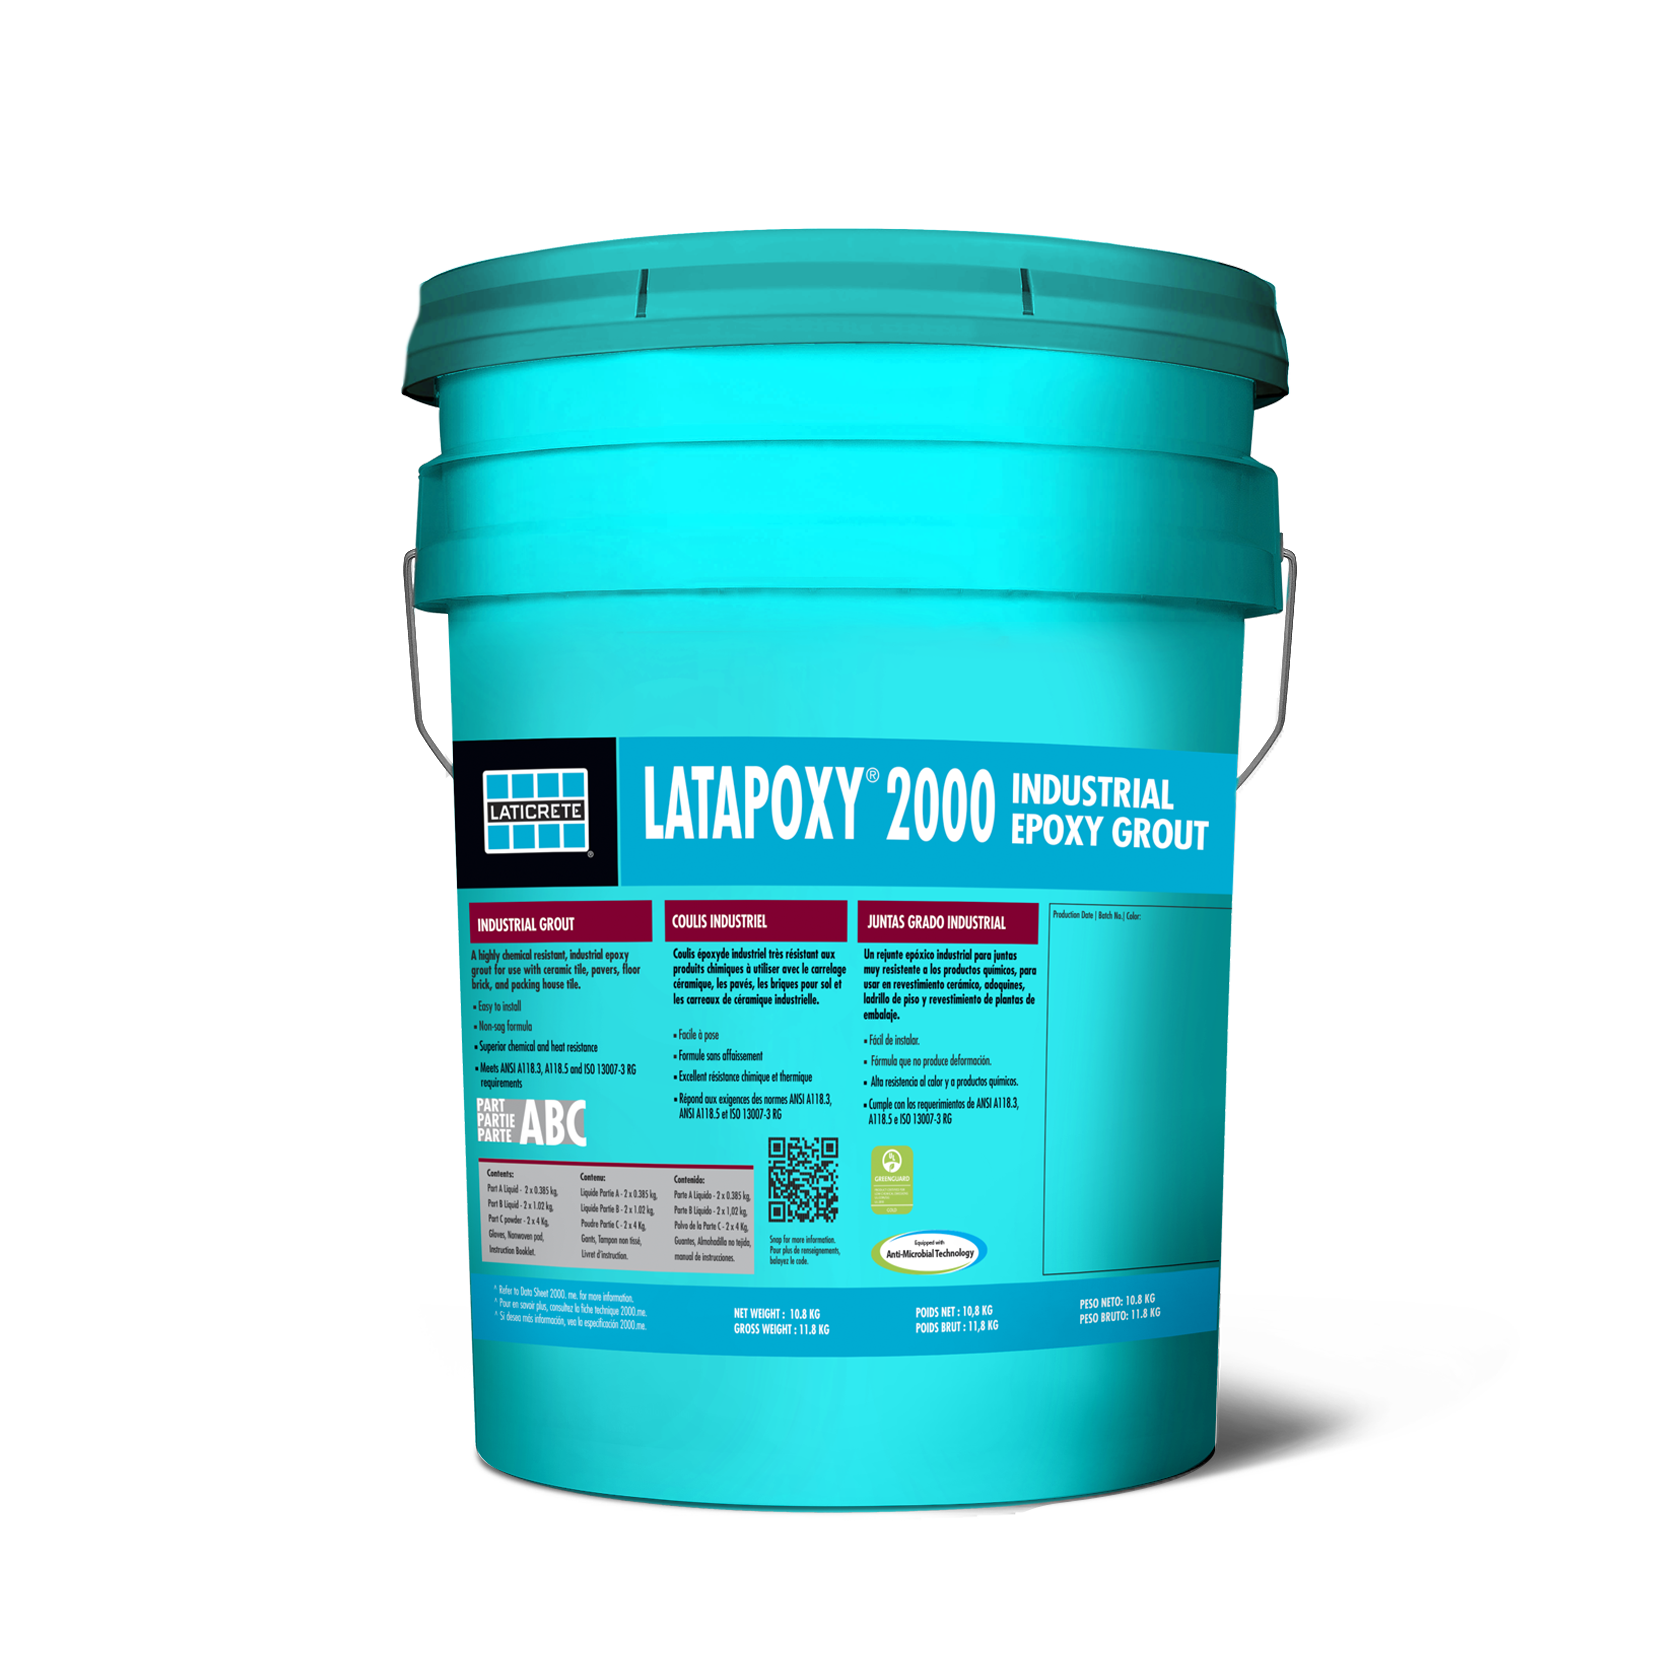 LATAPOXY 2000 INDUSTRIAL EPOXY GROUT